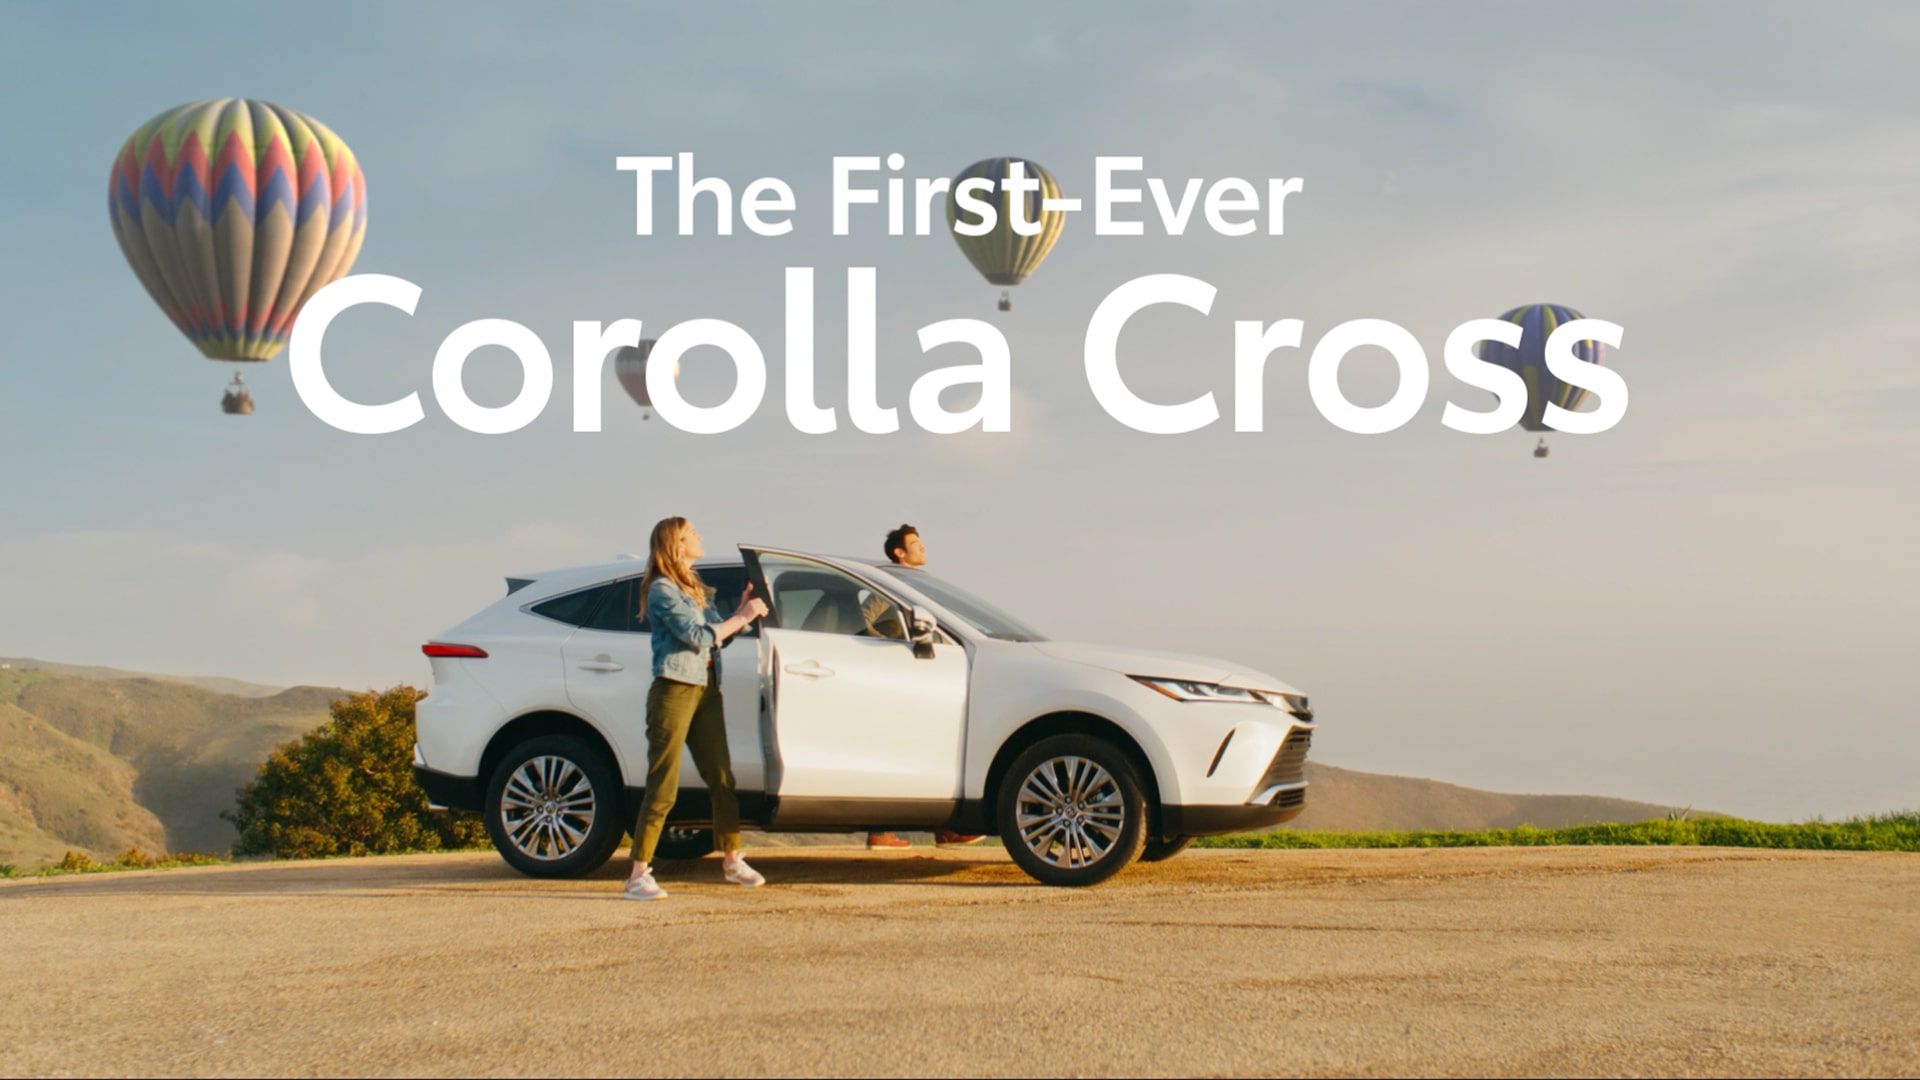 A super reading “The First-Ever Corolla Cross” over an image of a couple getting out of their vehicle to watch hot-air balloons in the sky.